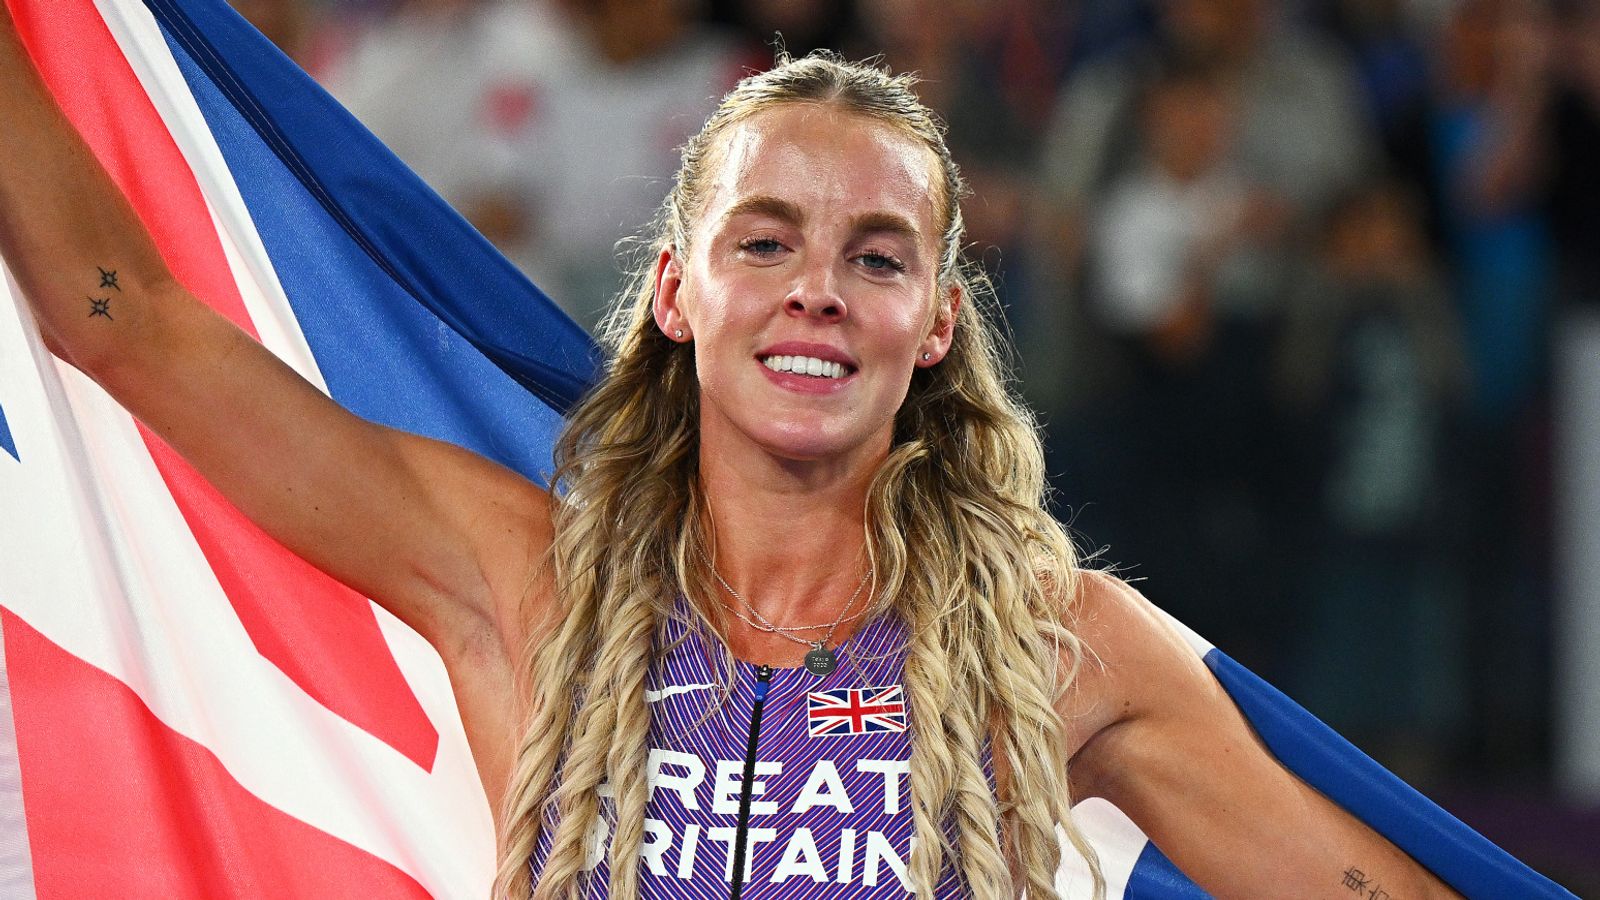 Keely Hodgkinson wins 800m gold for Great Britain at European Championships in Rome | Athletics News